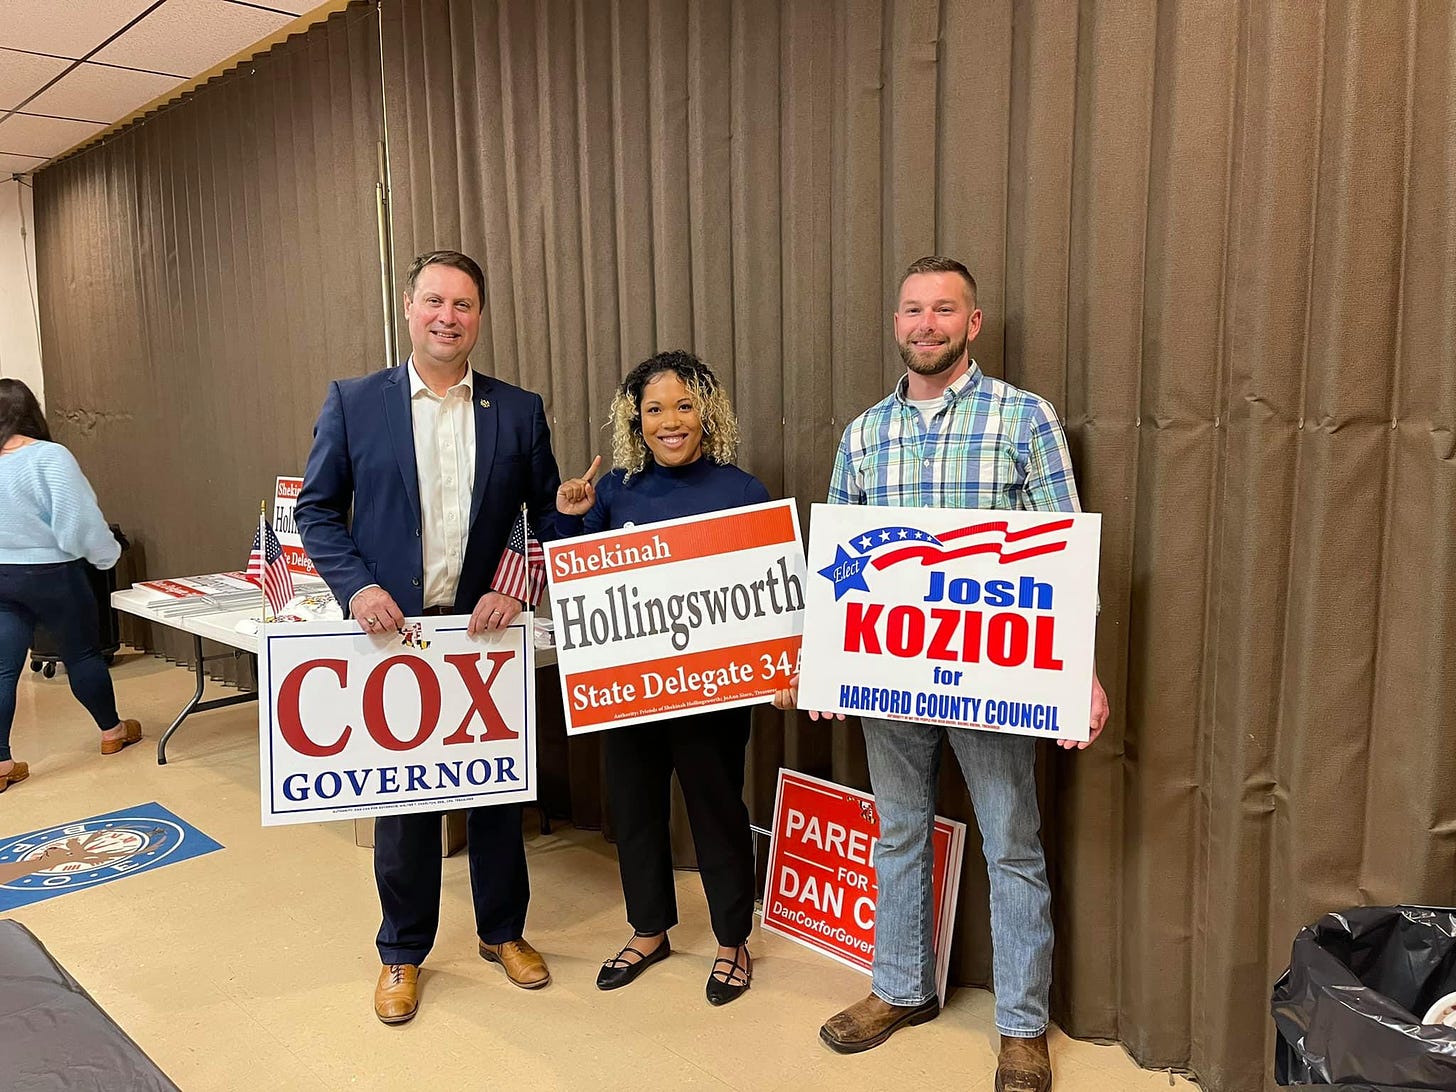 May be an image of 4 people, people standing and text that says 'Hollingsworth Elect Shekinah Josh KOZIOL COX State Delegate 34 for HARFORD COUNTY COUNCIL GOVERNOR PARE AN FOR DanCoxforGover Gover'